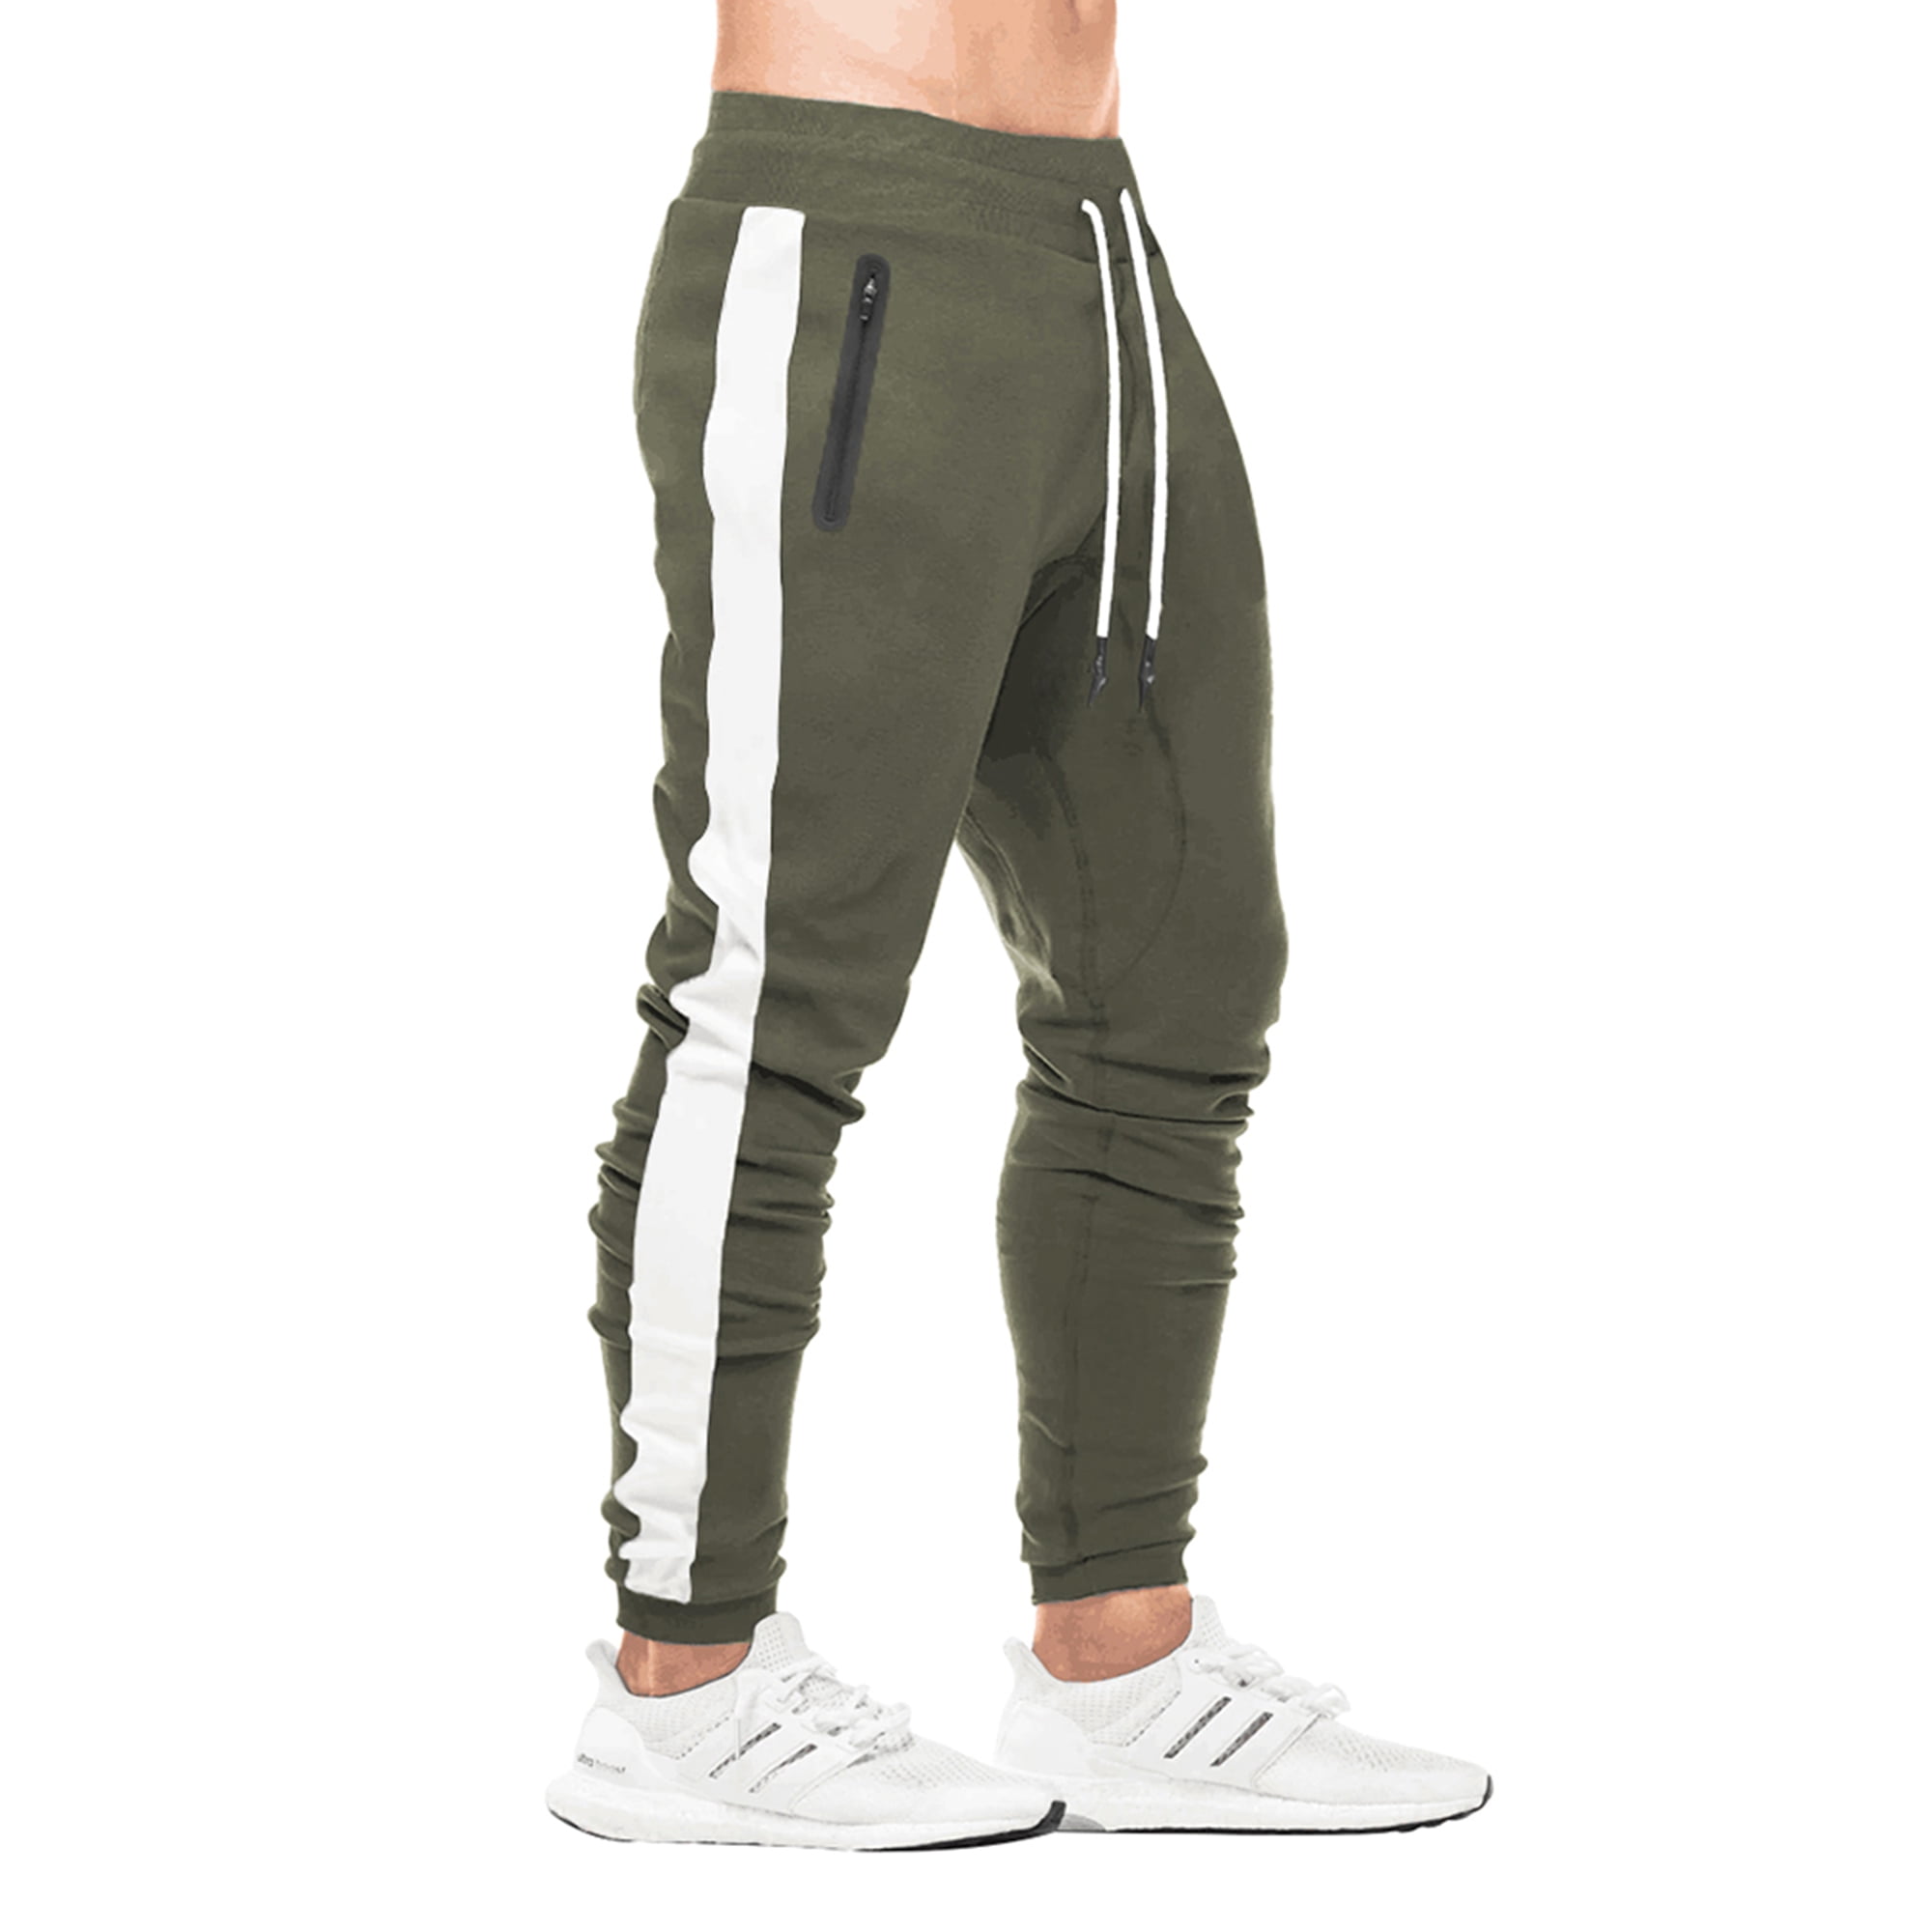 G Gradual Men's Slim Jogger Pants,Tapered Sweatpants for Training,  Running,Workout with Elastic Bottom - AliExpress